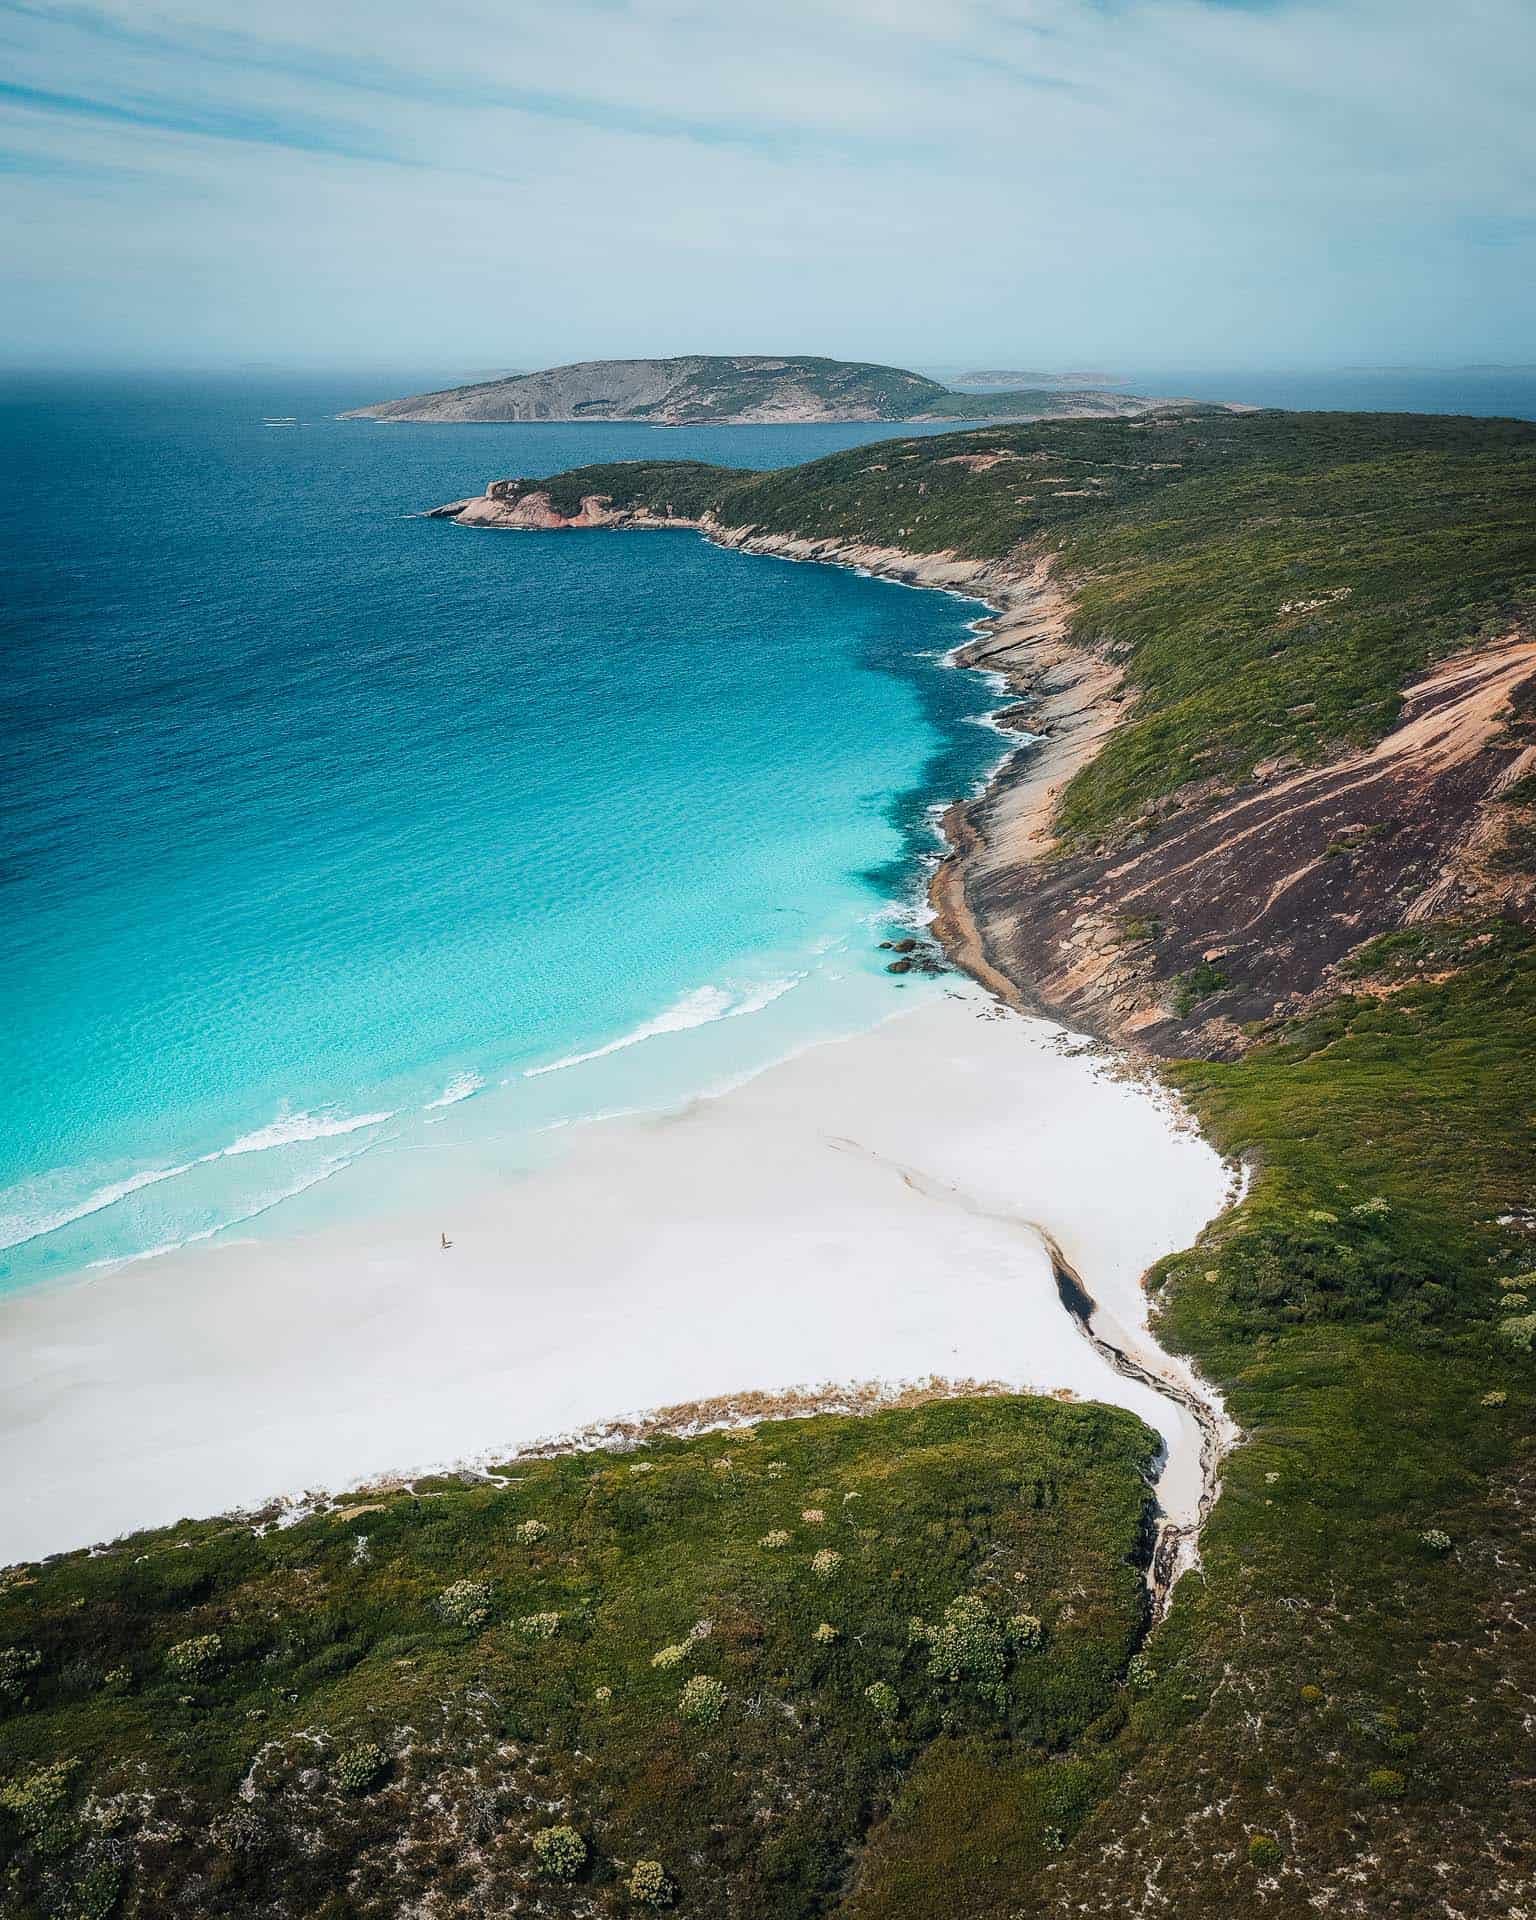 things to do in esperance, what to do in esperance, esperance things to do, esperance attractions, beaches in esperance, hellfire bay, hellfire bay esperance